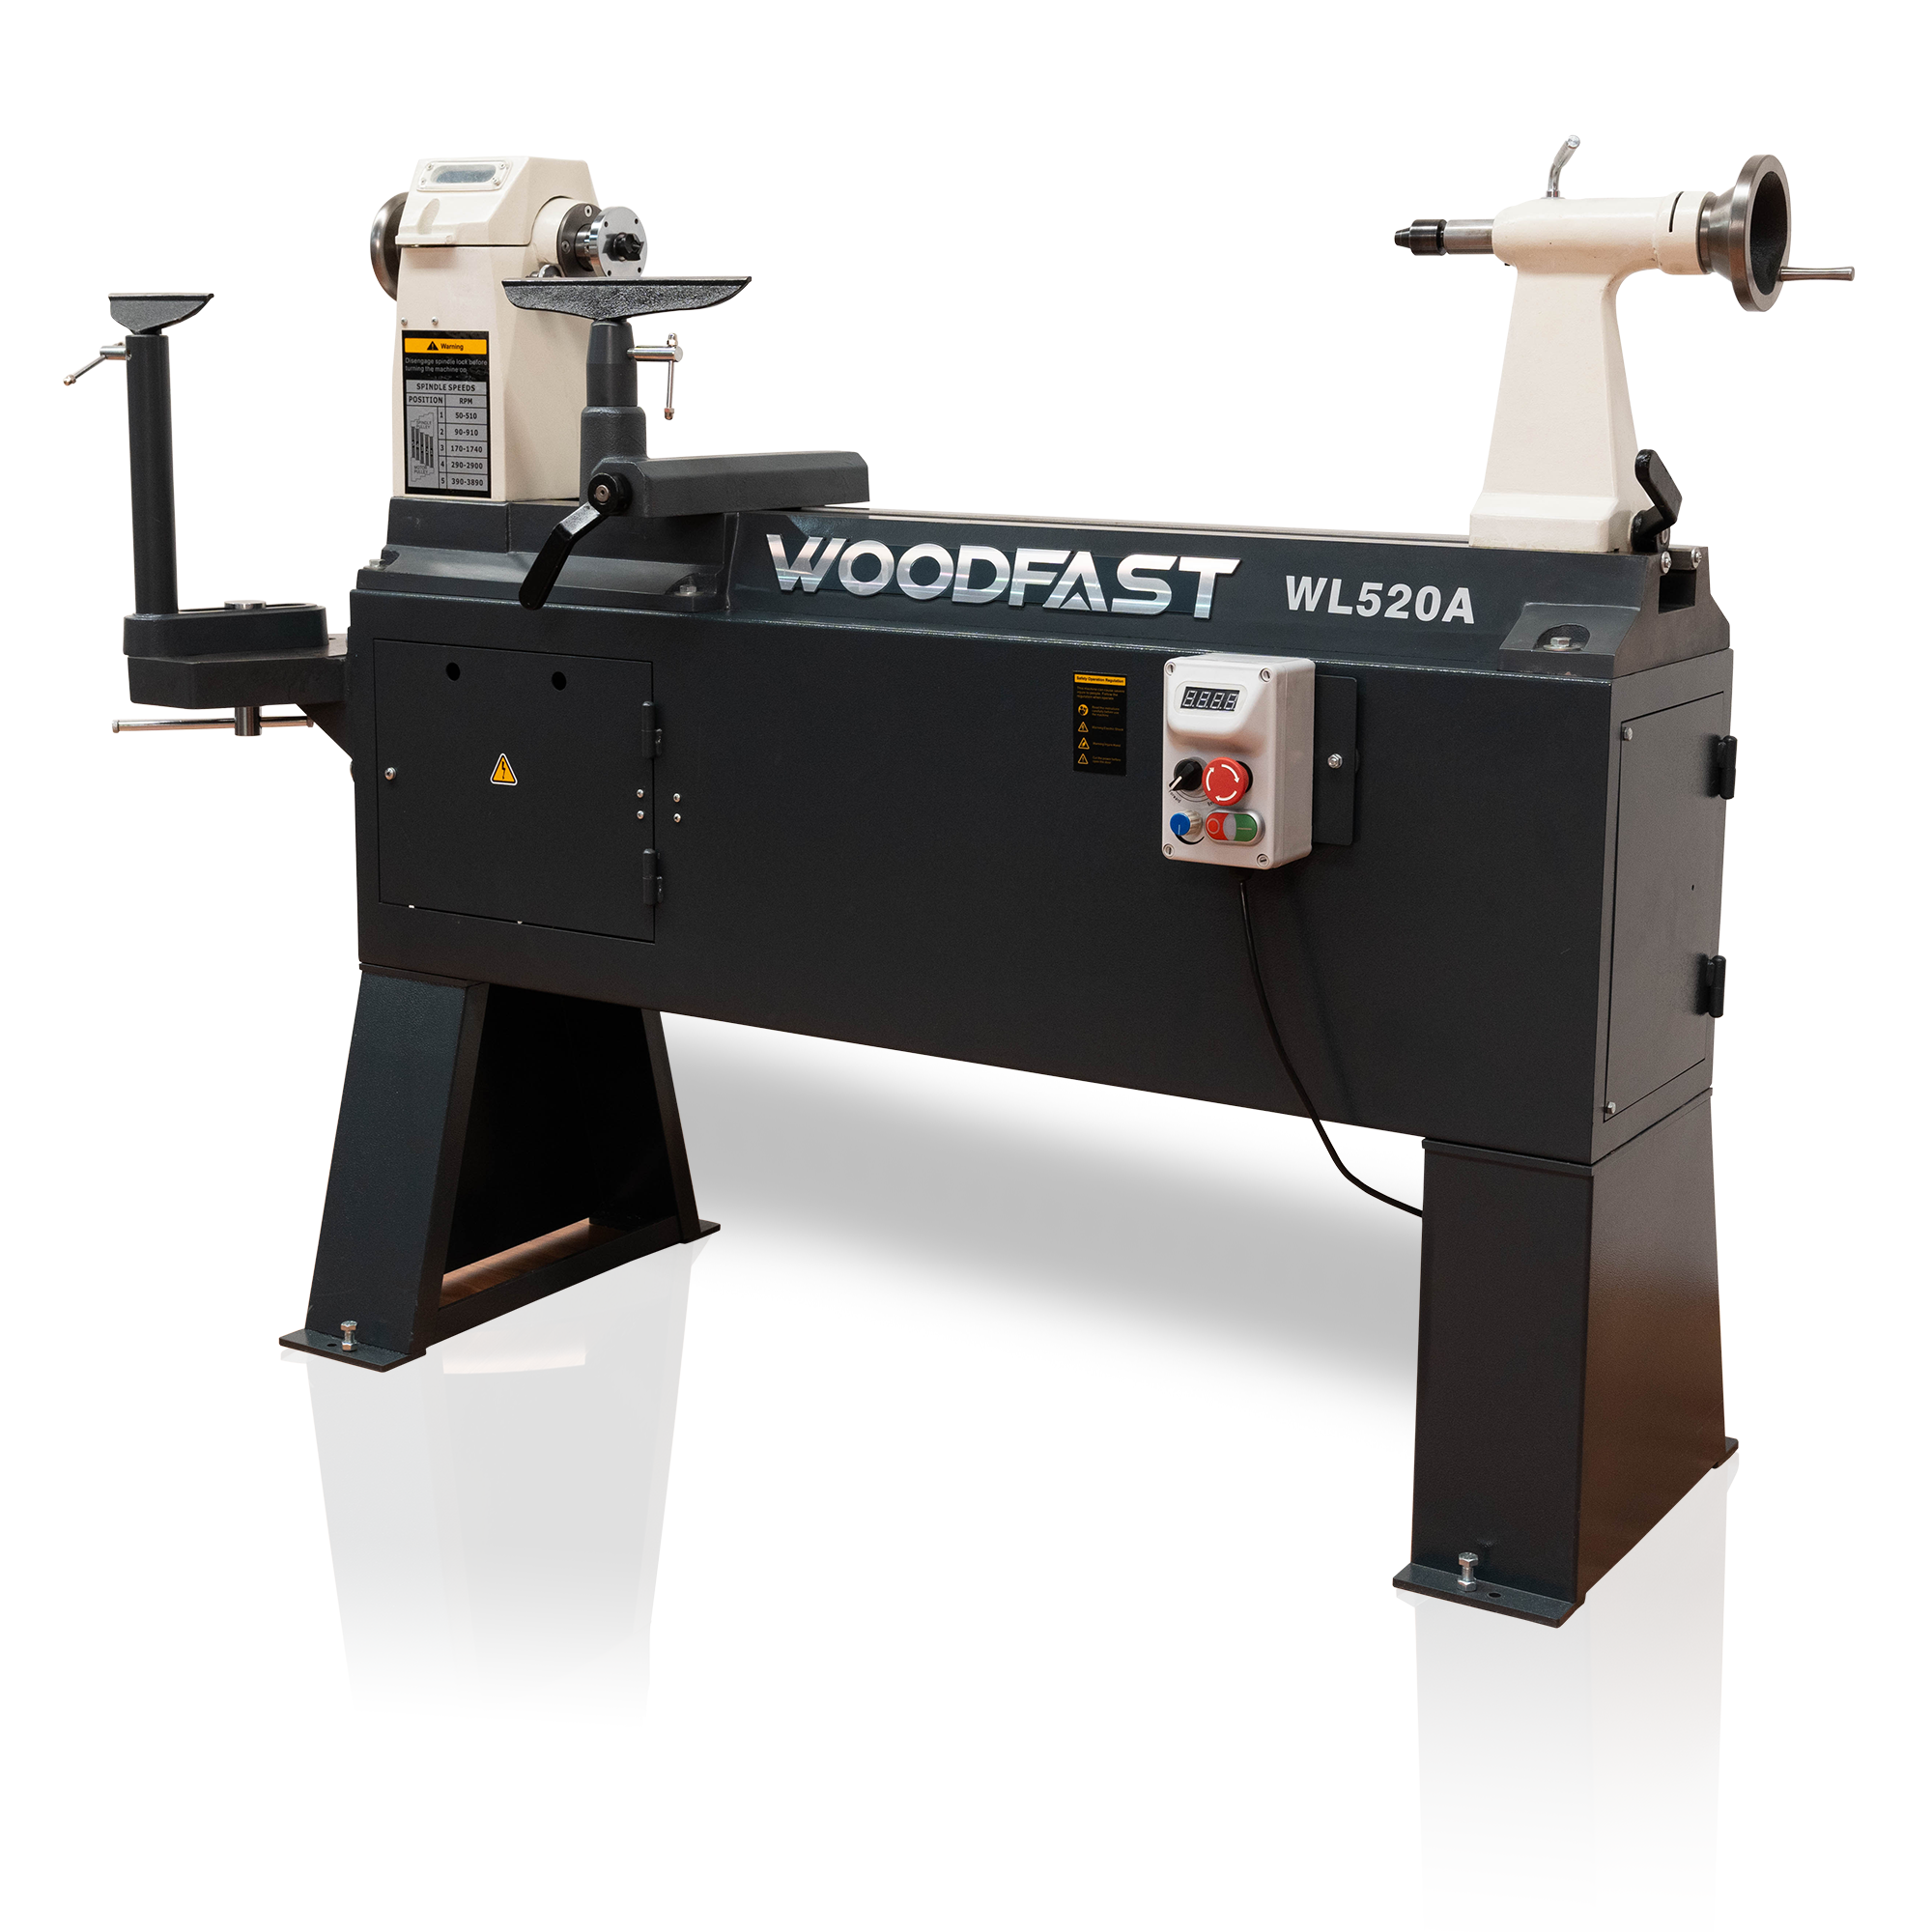 510mm (20") Swing x 915mm (36") Between Centres Heavy Duty Wood Lathe WL520A by Woodfast